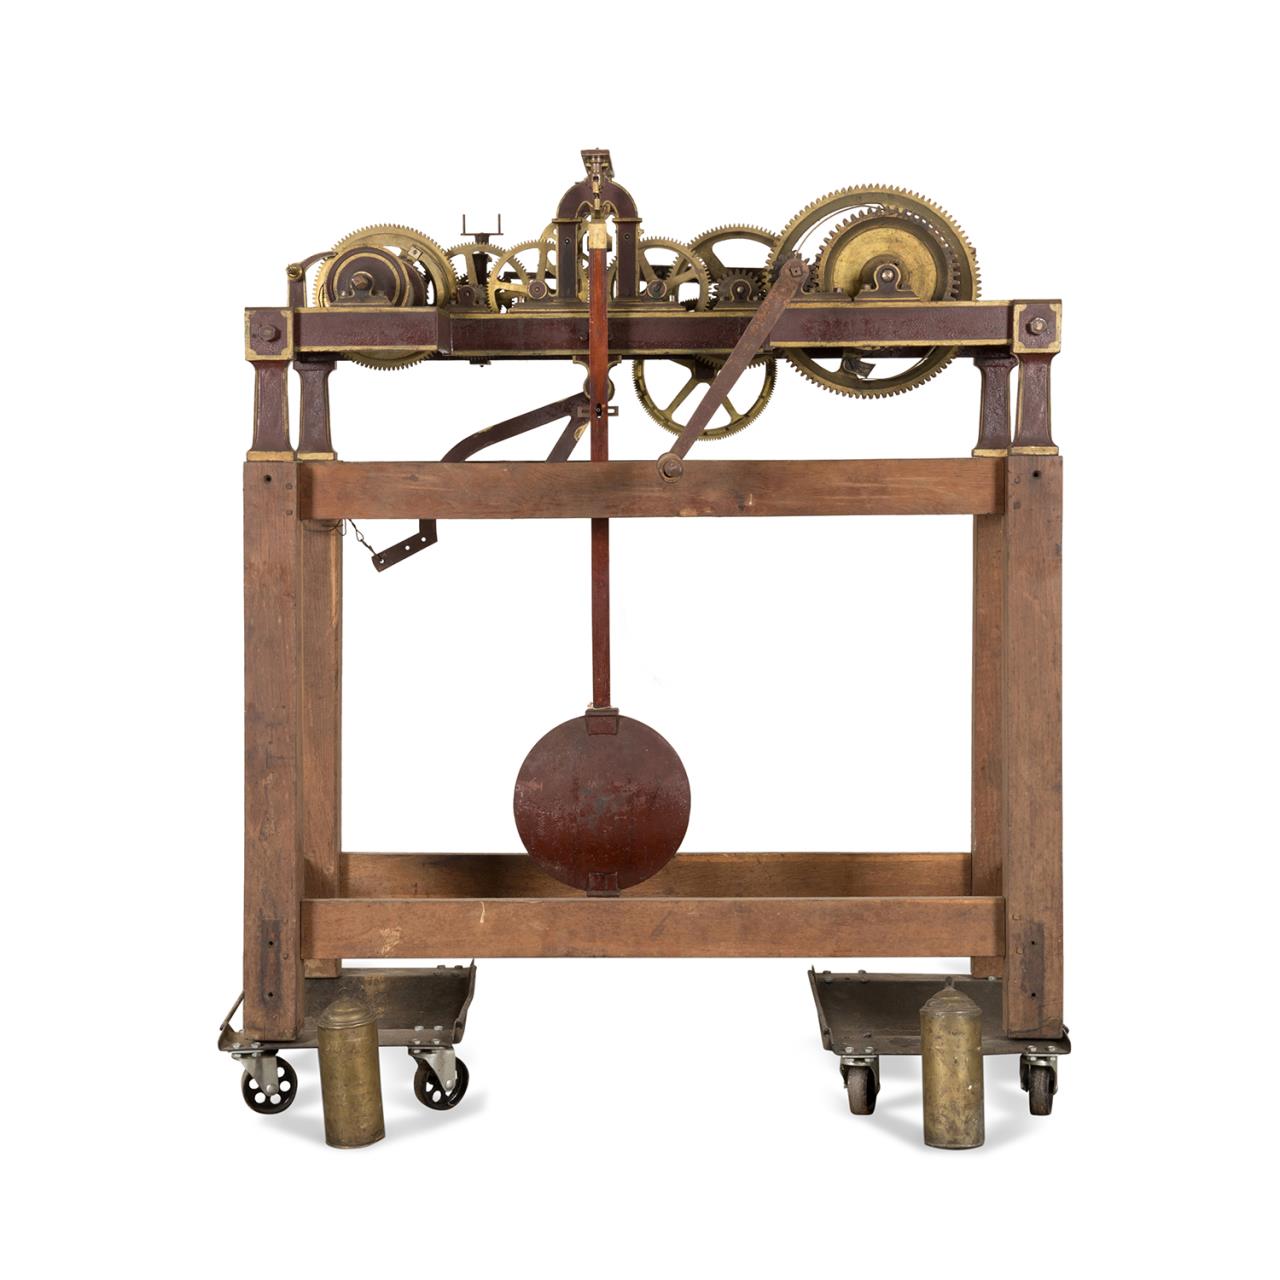 FRENCH TOWER CLOCK MECHANISM, C.